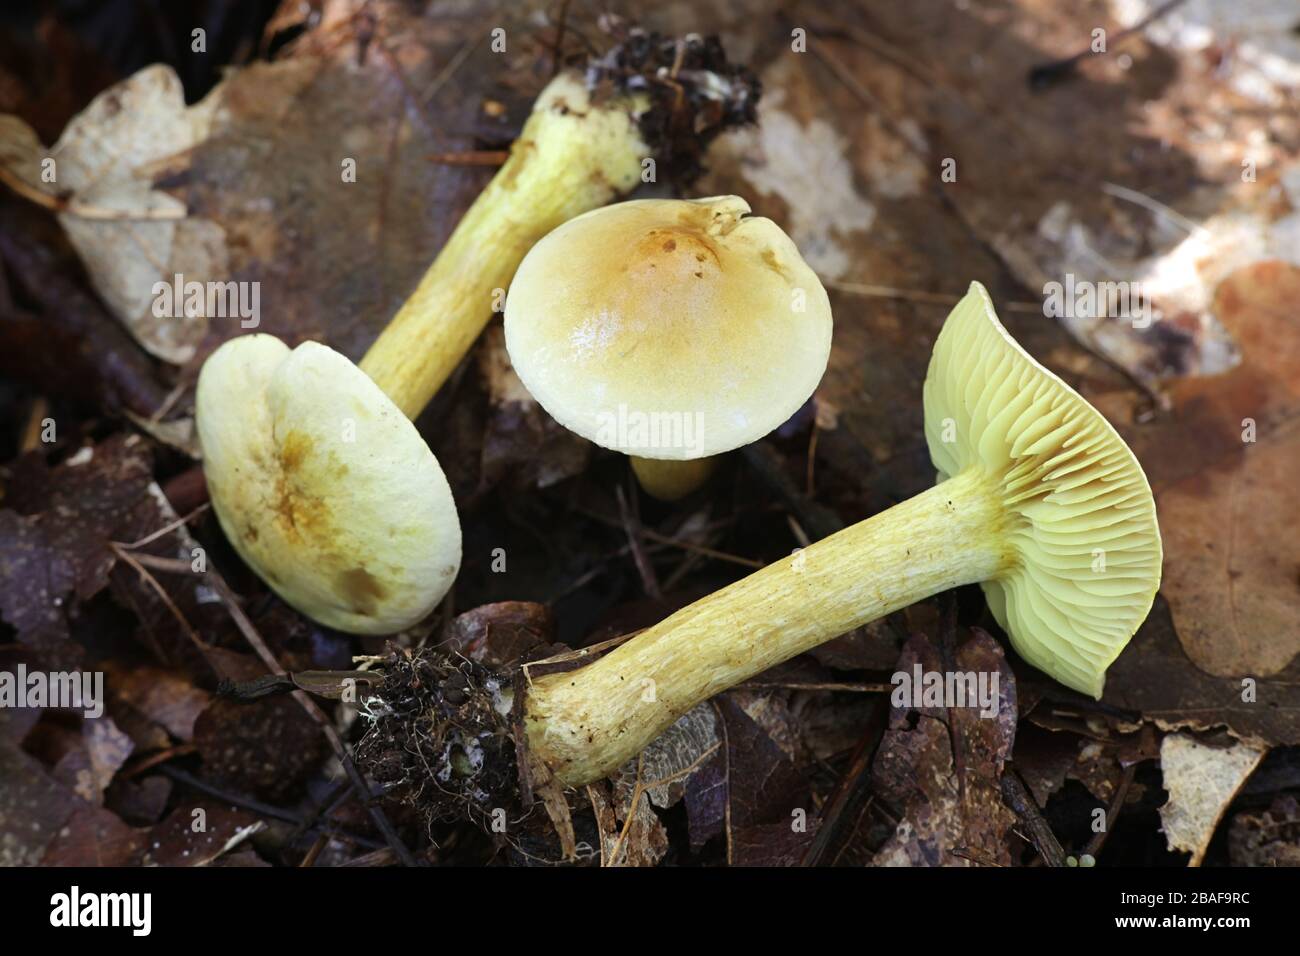 Tricholoma sulphureum, known as sulphur knight or gas agaric, inedible mushrooms from Finland Stock Photo